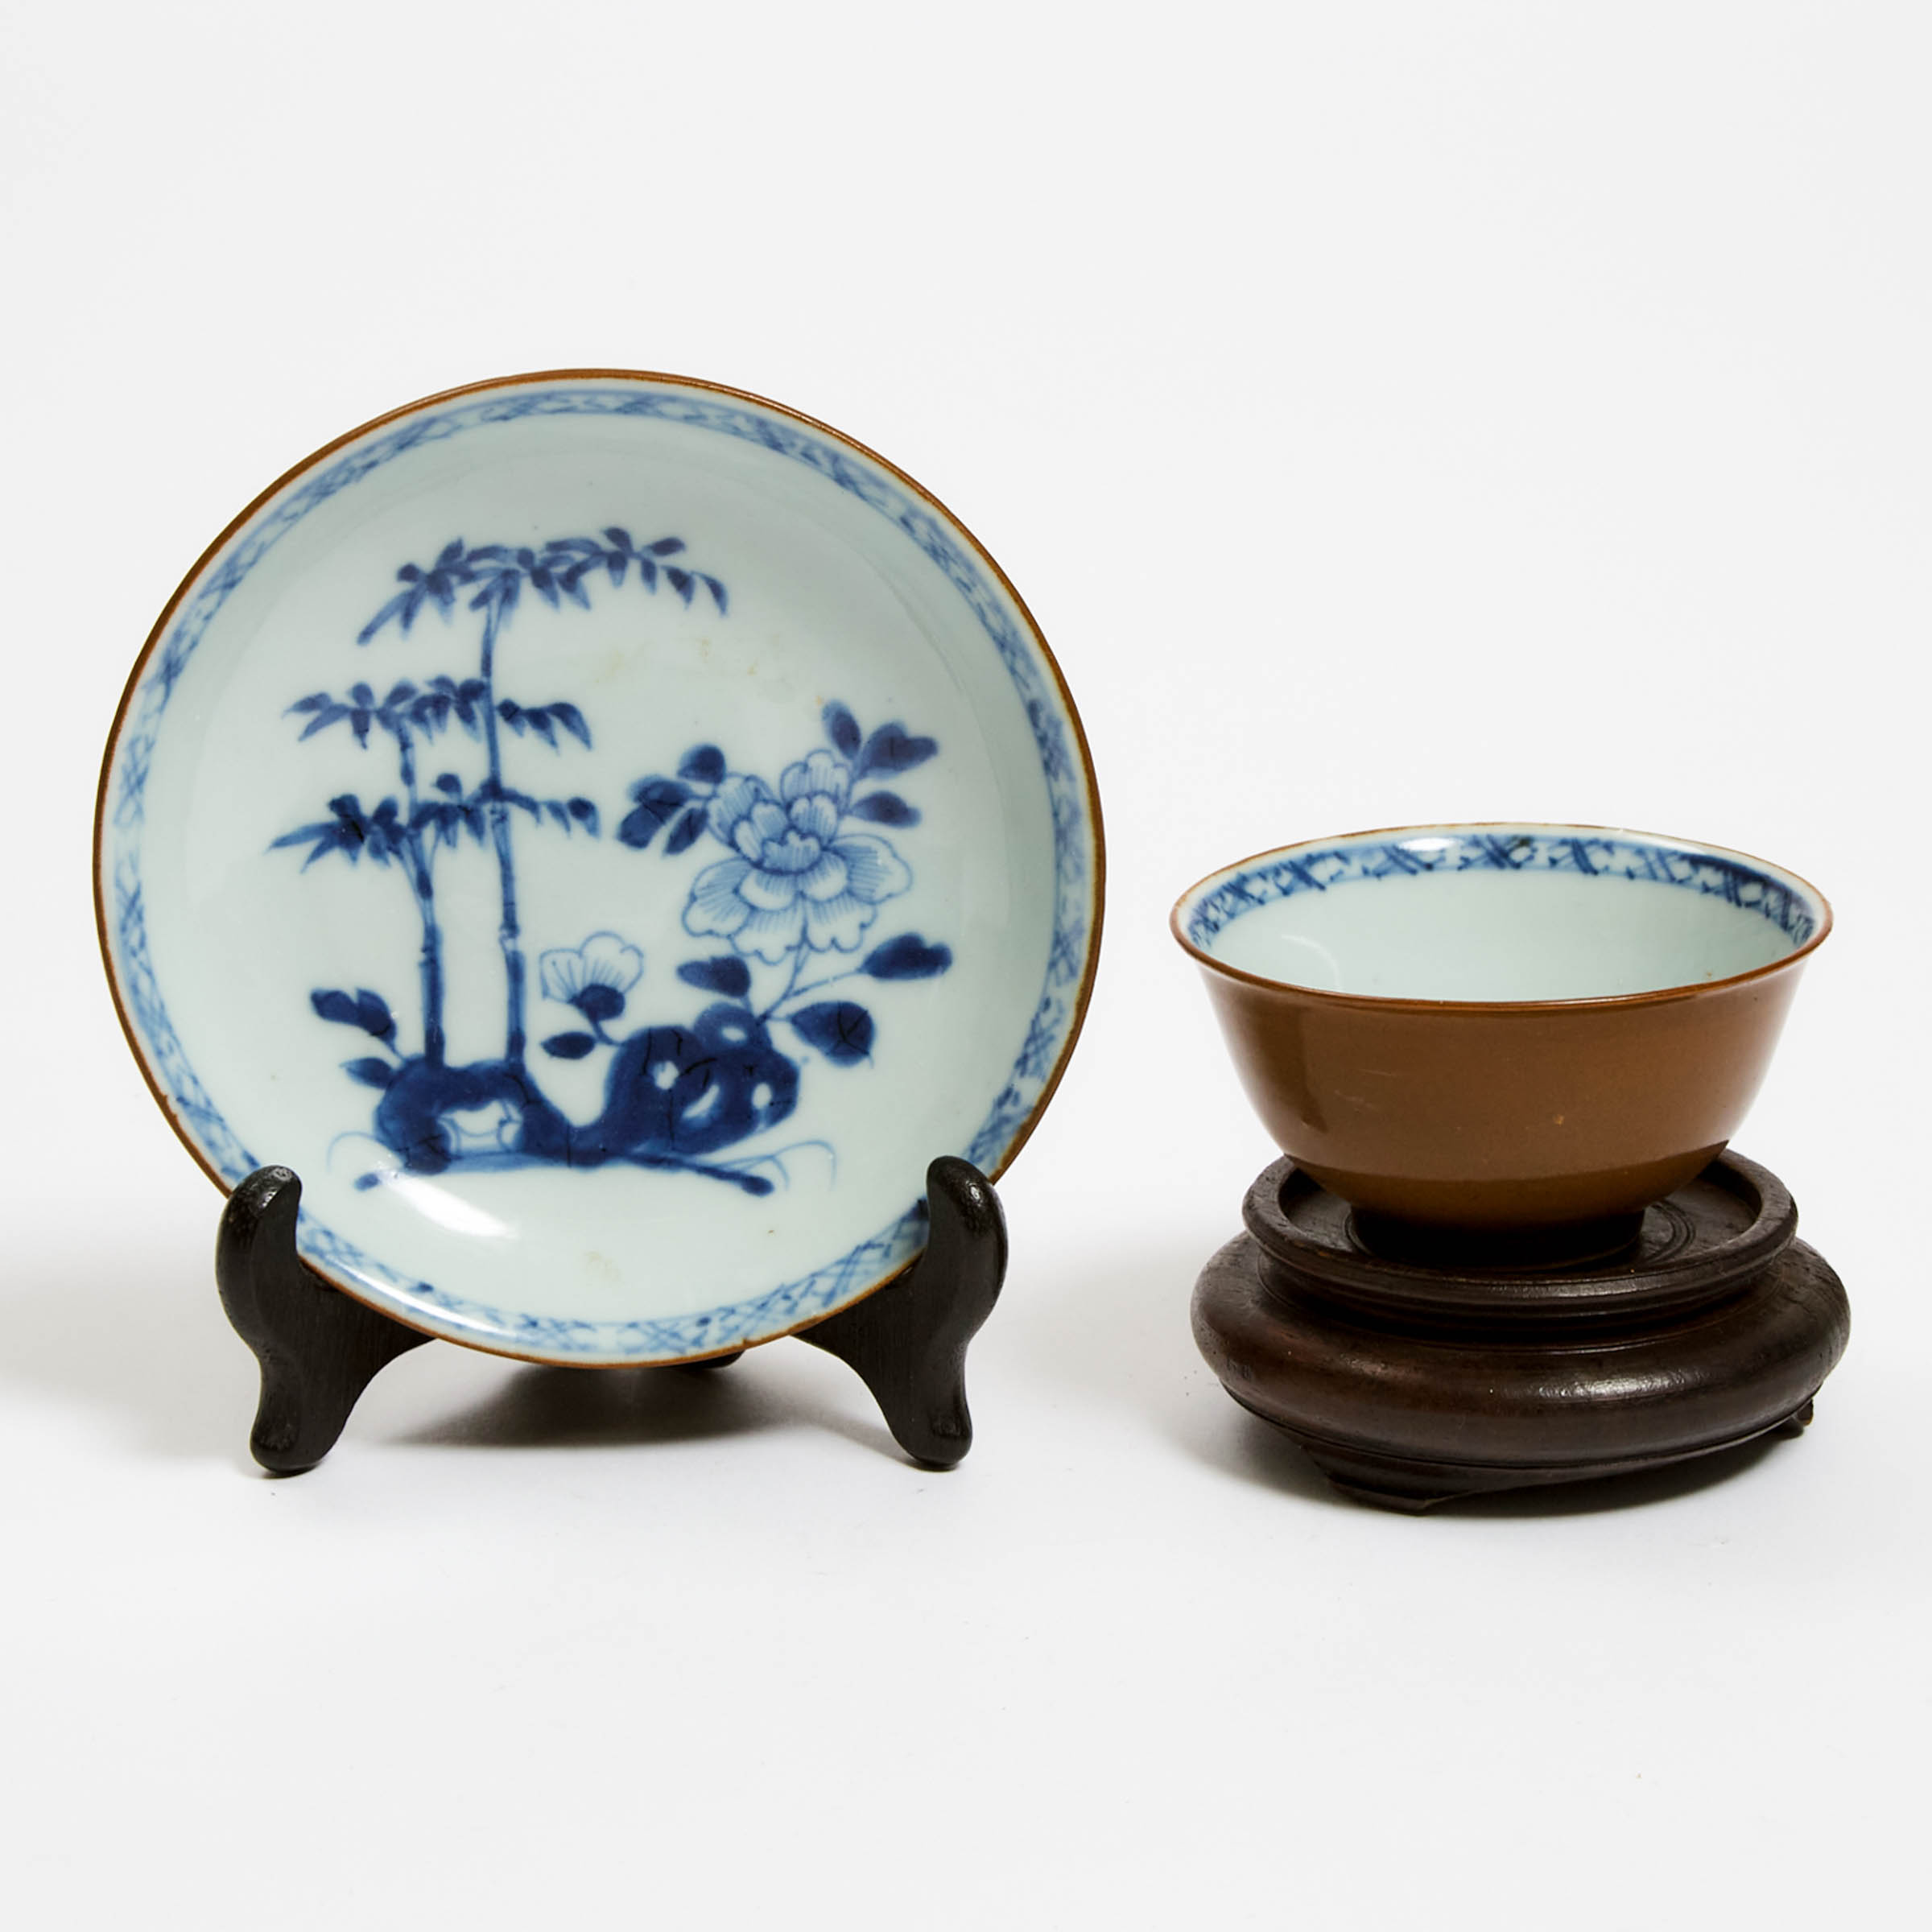 A 'Batavian Bamboo and Peony' Pattern Teabowl and Saucer from the Nanking Cargo, Qianlong Period, Circa 1750